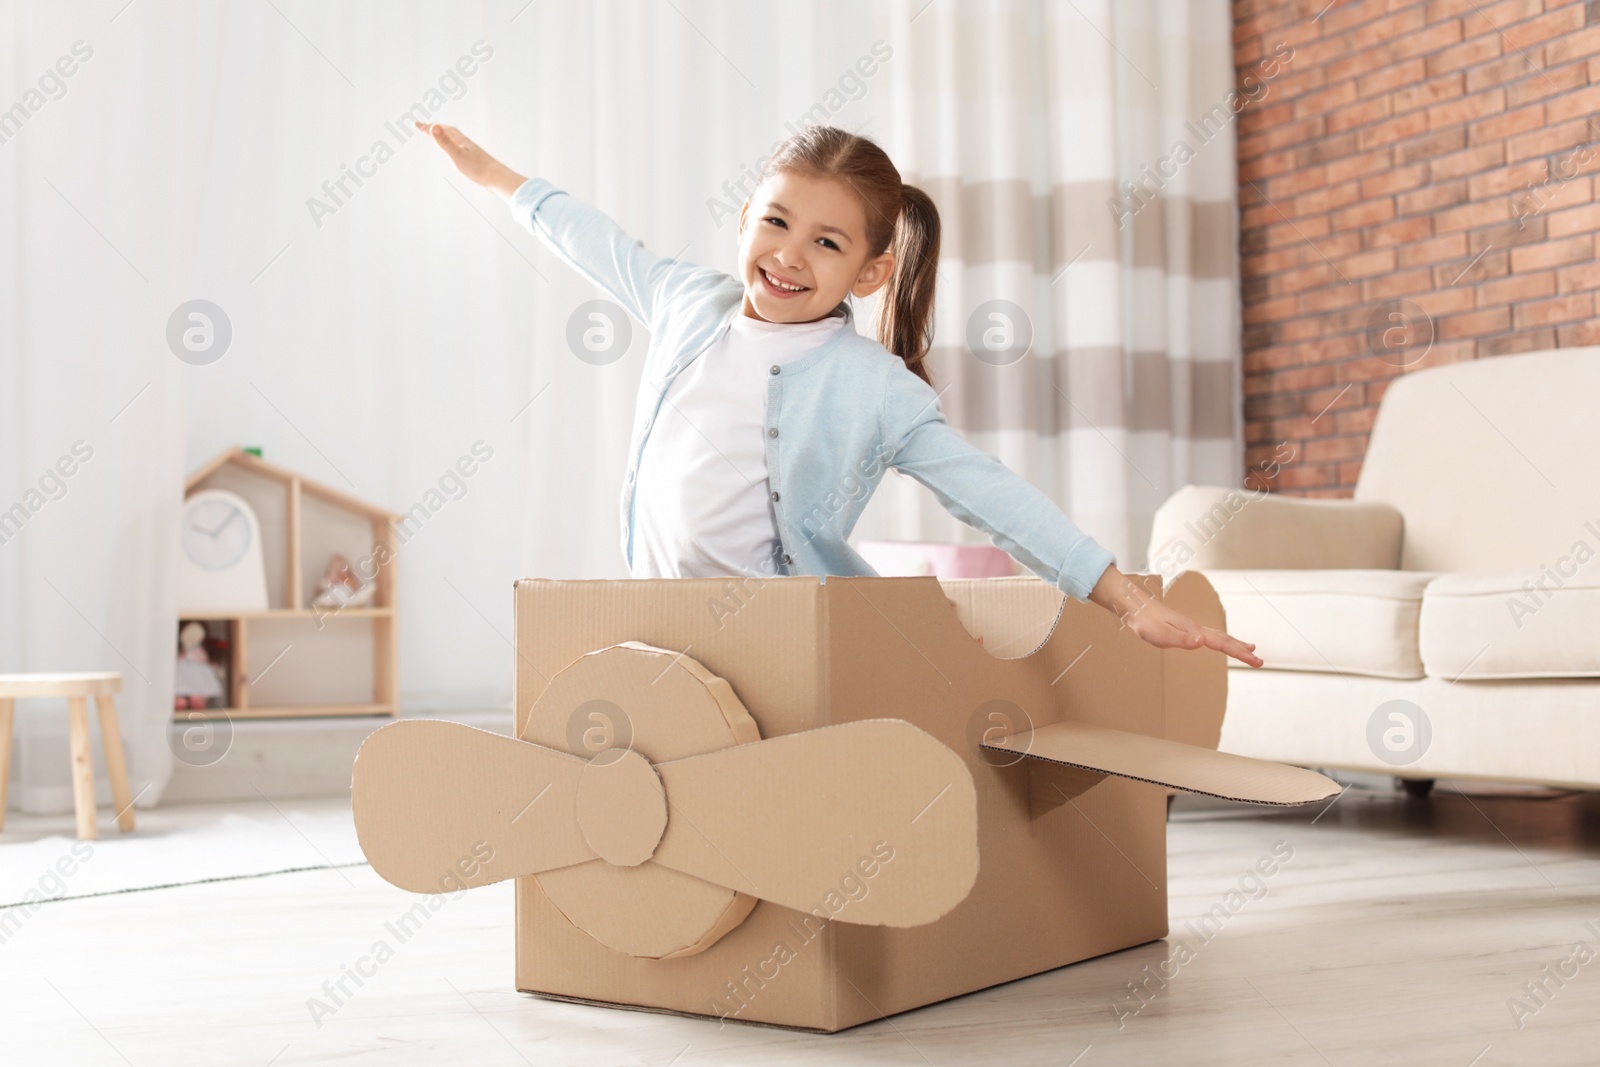 Photo of Cute little girl playing with cardboard airplane in living room